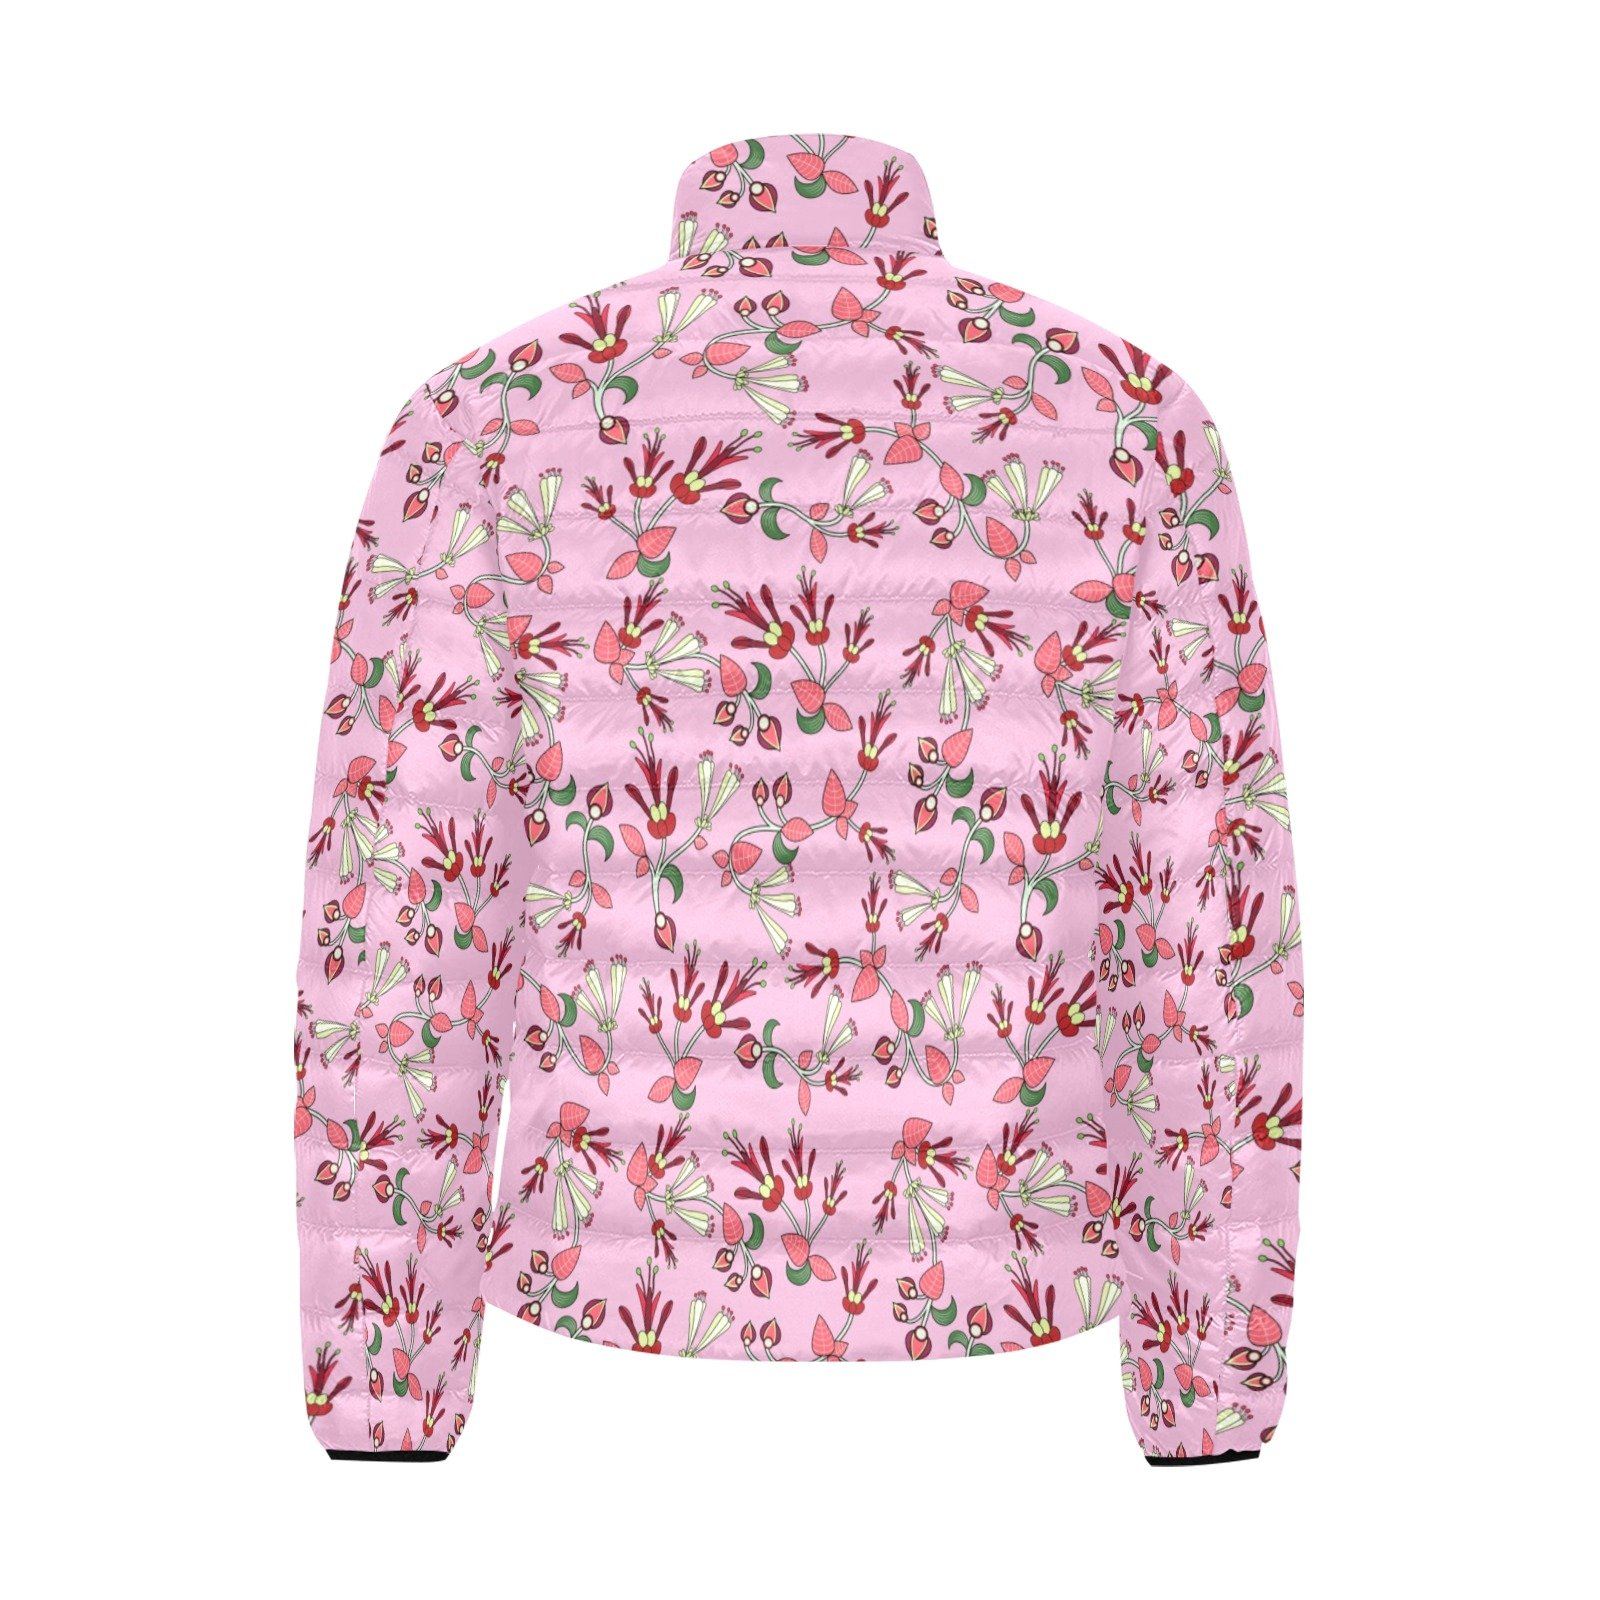 Strawberry Floral Men's Stand Collar Padded Jacket (Model H41) Men's Stand Collar Padded Jacket (H41) e-joyer 